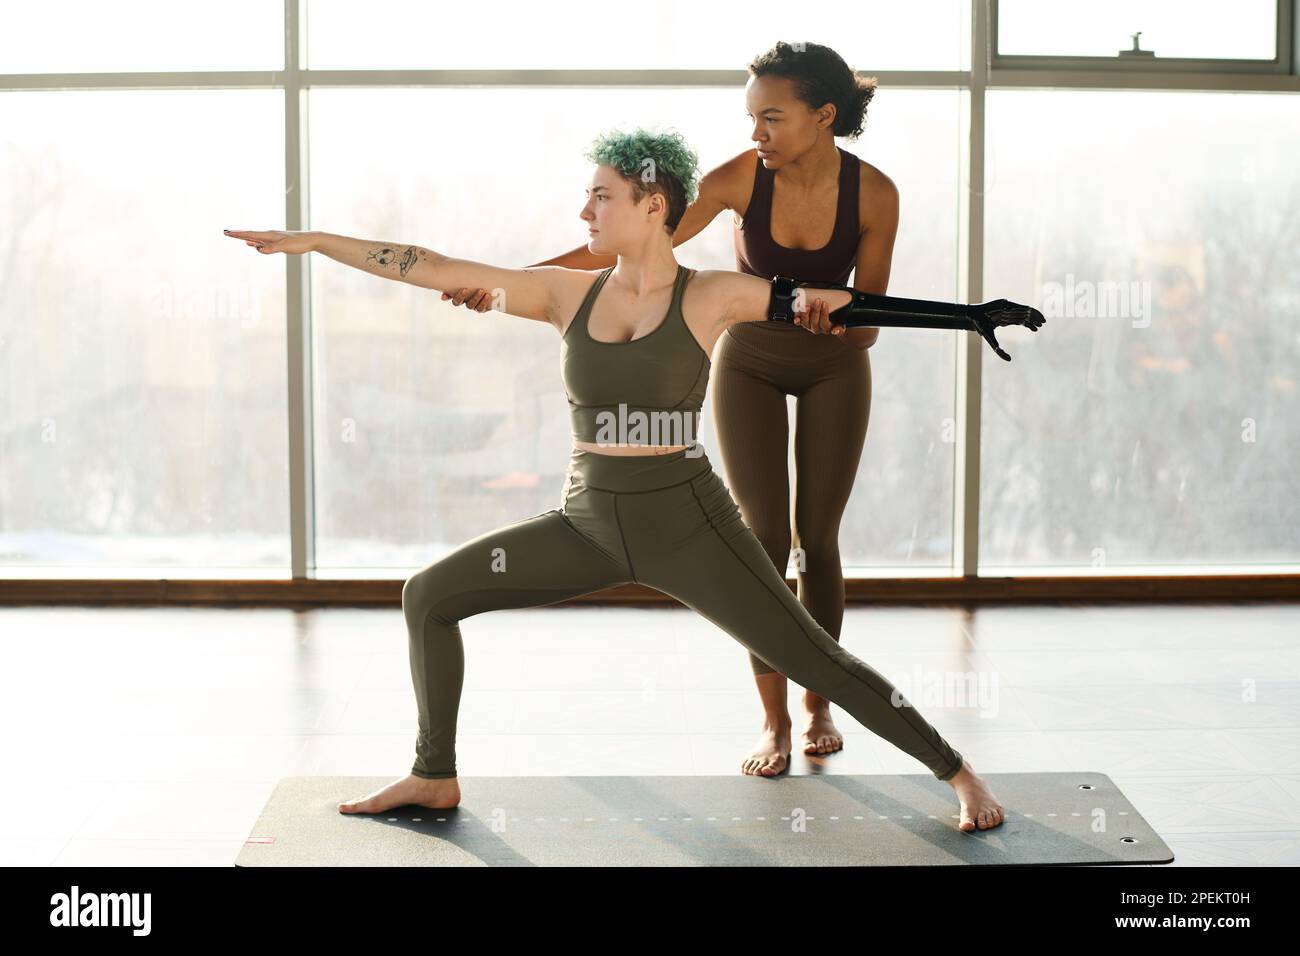 Young woman with prosthetic arm doing stretching exercises with instructor helping her Stock Photo